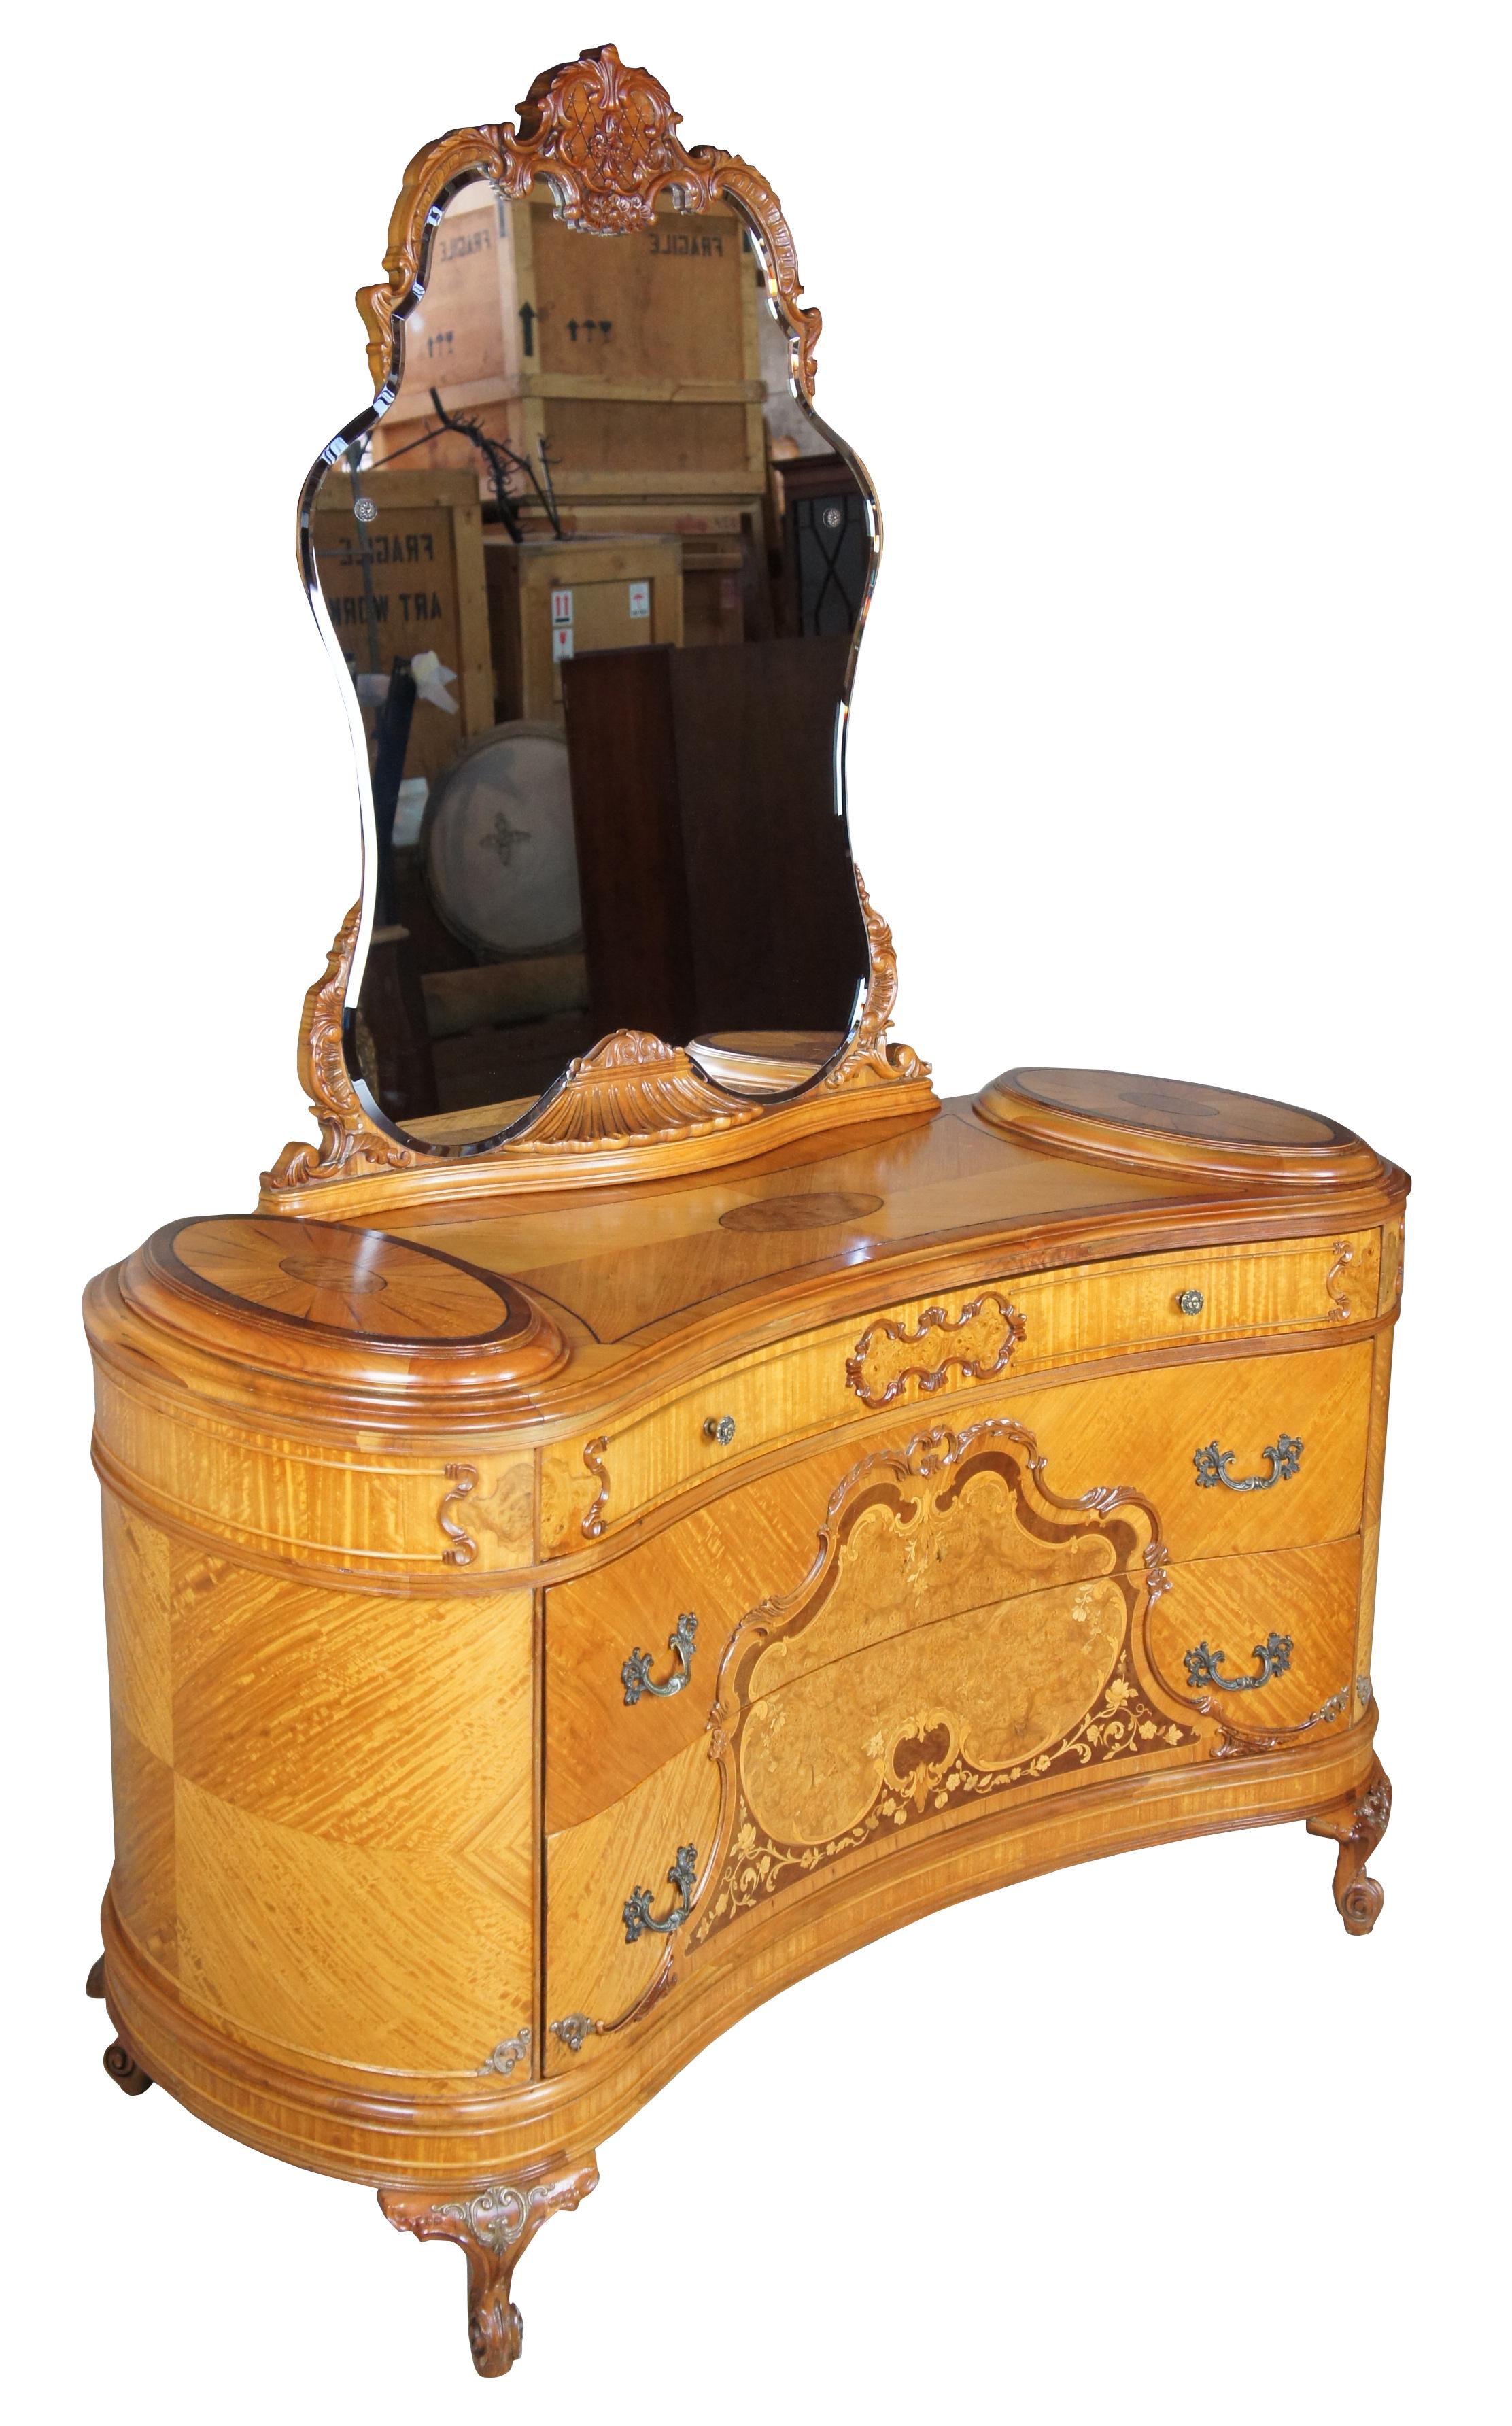 French dresser and mirror, circa 1920s. Features a curved shape with matchbook veneering and burled accents. Made from walnut, ornately carved. Includes three drawers, and cabriole scrolled feet.
  
Surface Height - 34.5